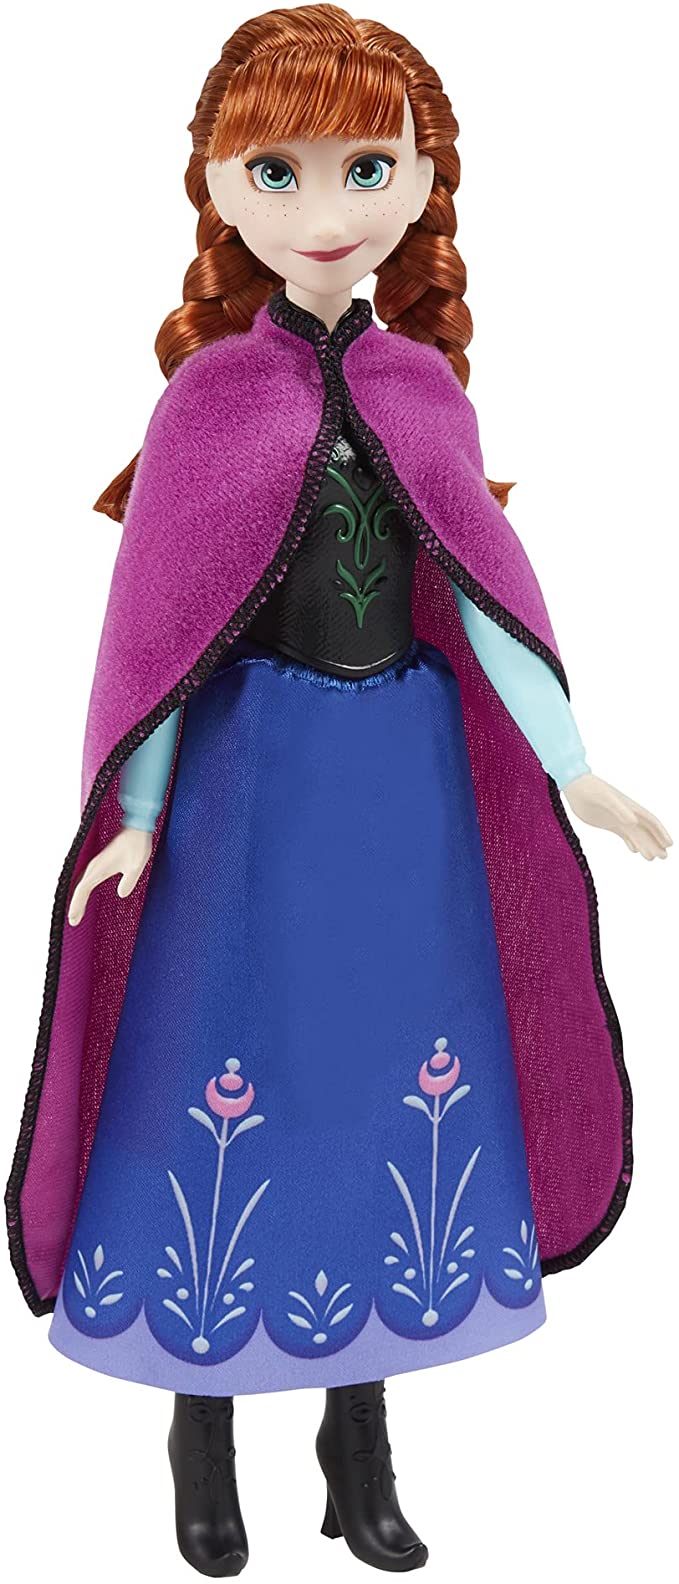 Disney's Frozen Shimmer Anna Fashion Doll, Skirt, Shoes, and Long Red Hair, Toy for Kids 3 Years Old and Up